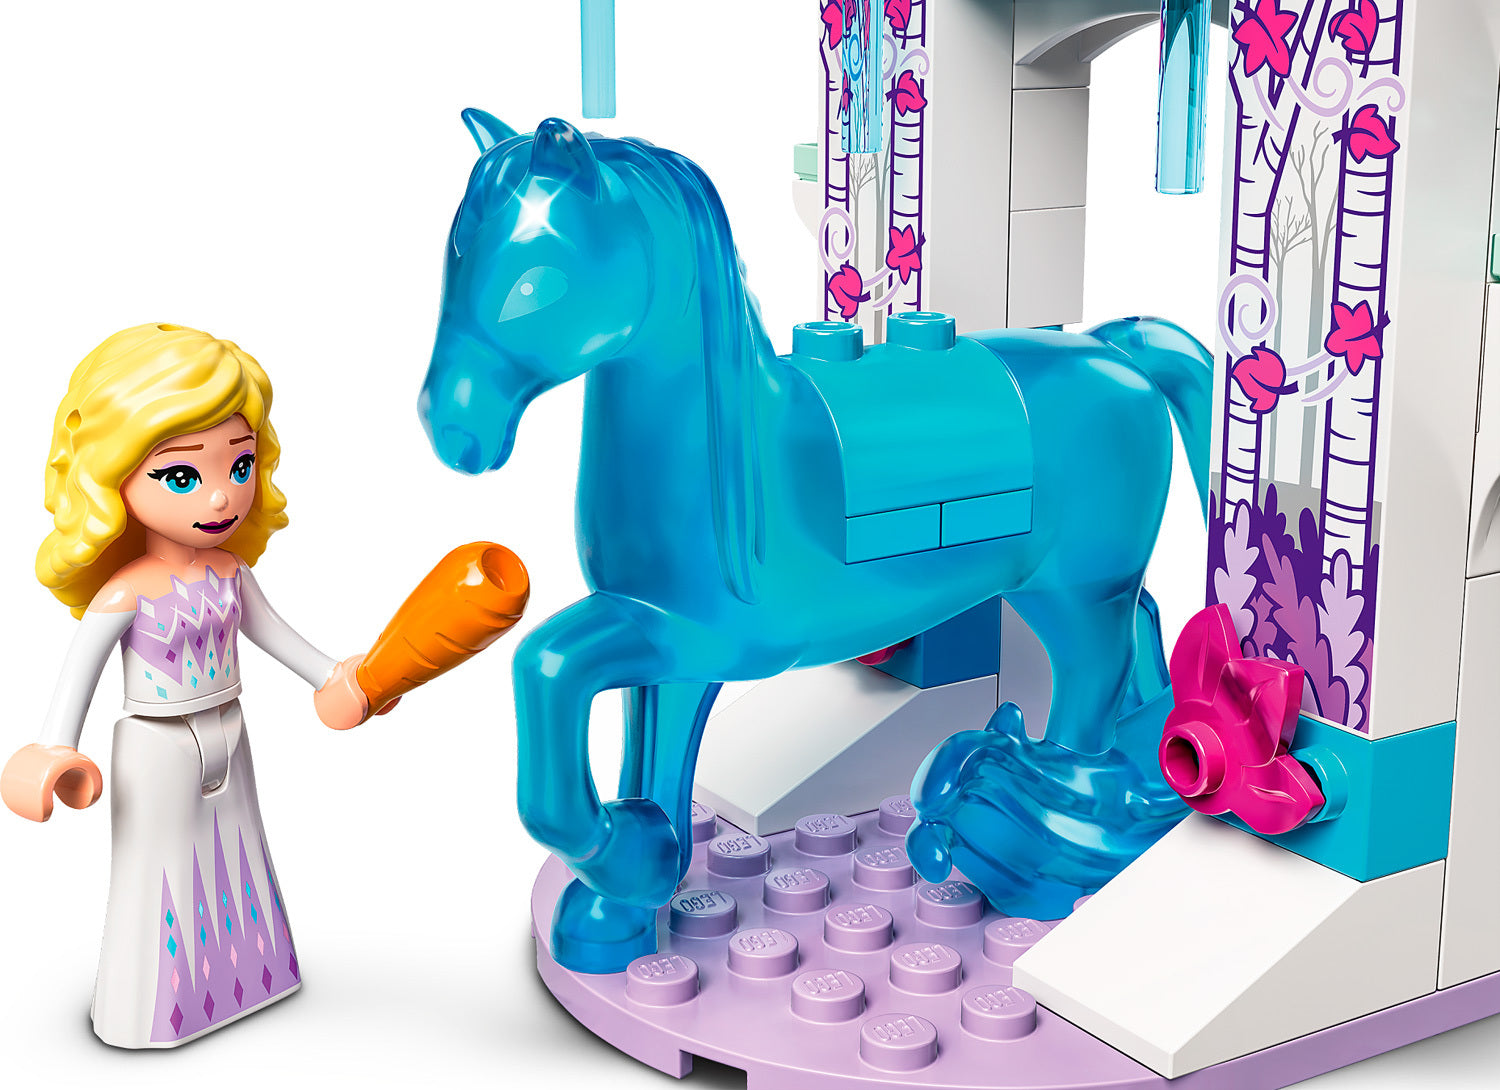 Elsa and the Nokk's Ice Stable